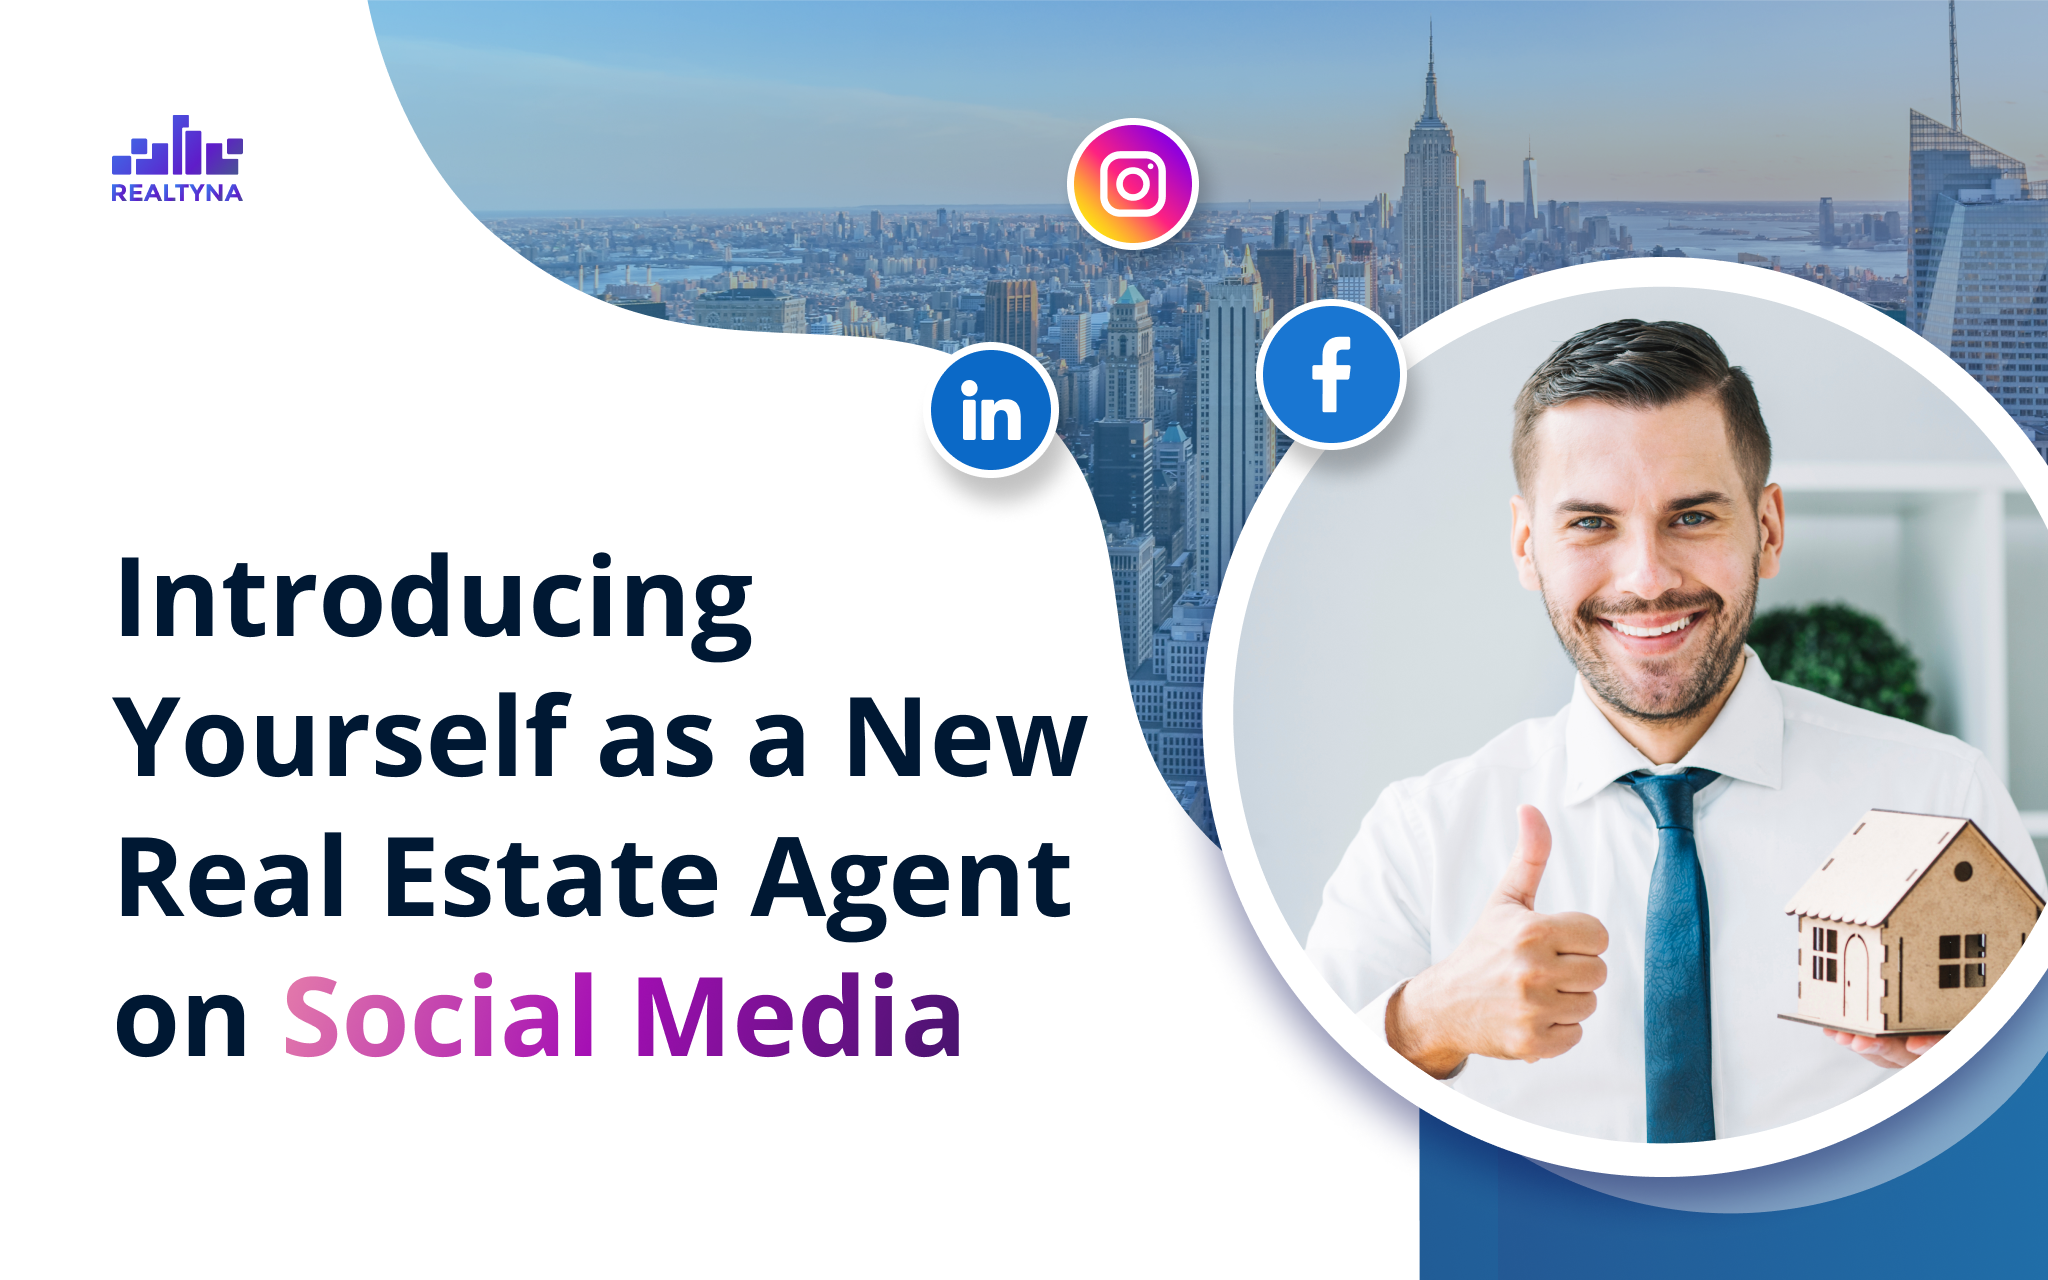 Introducing Yourself as a New Real Estate Agent on Social Media